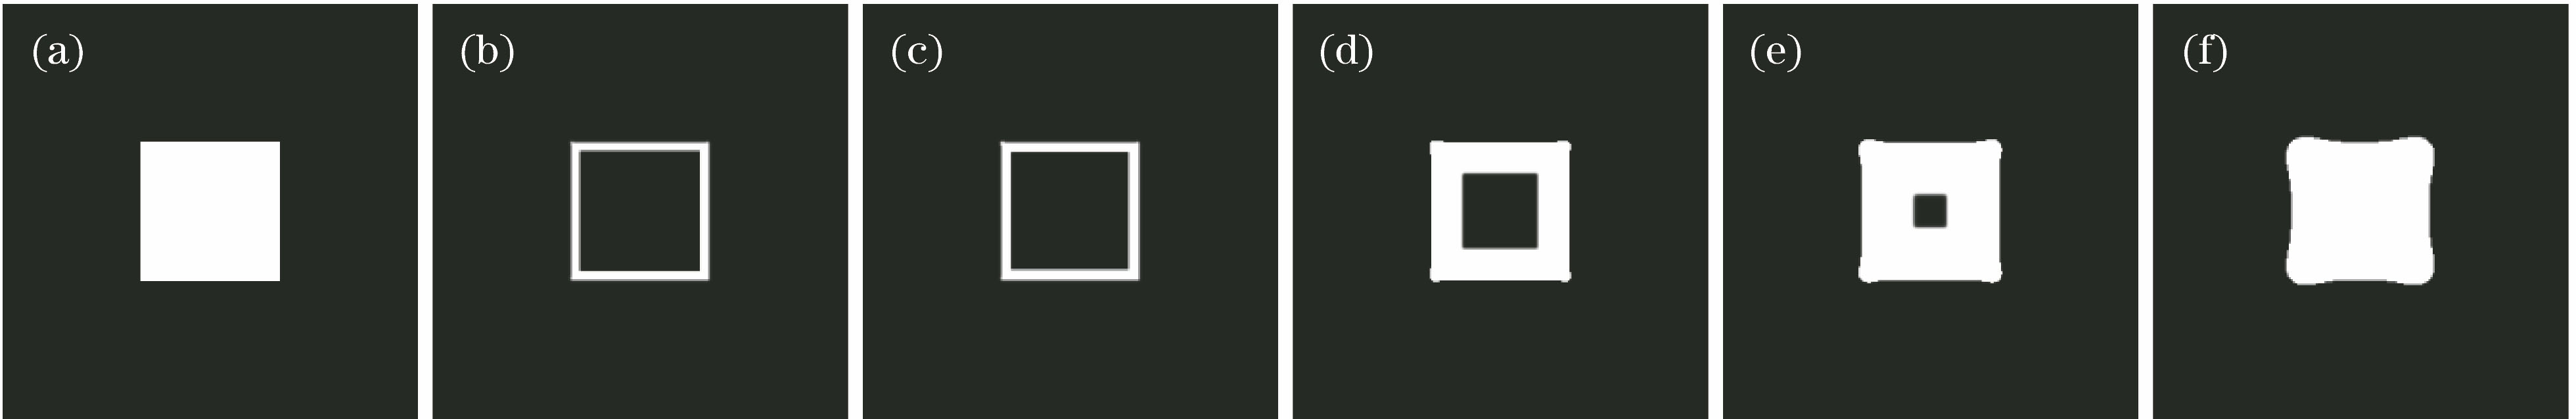 Rectangle spot after Mexican-hat wavelet transform with different scale coefficients a. (a) Rectangle spot; (b) a=0.009; (c) a=0.01; (d) a=0.03; (e) a=0.05; (f) a=0.1